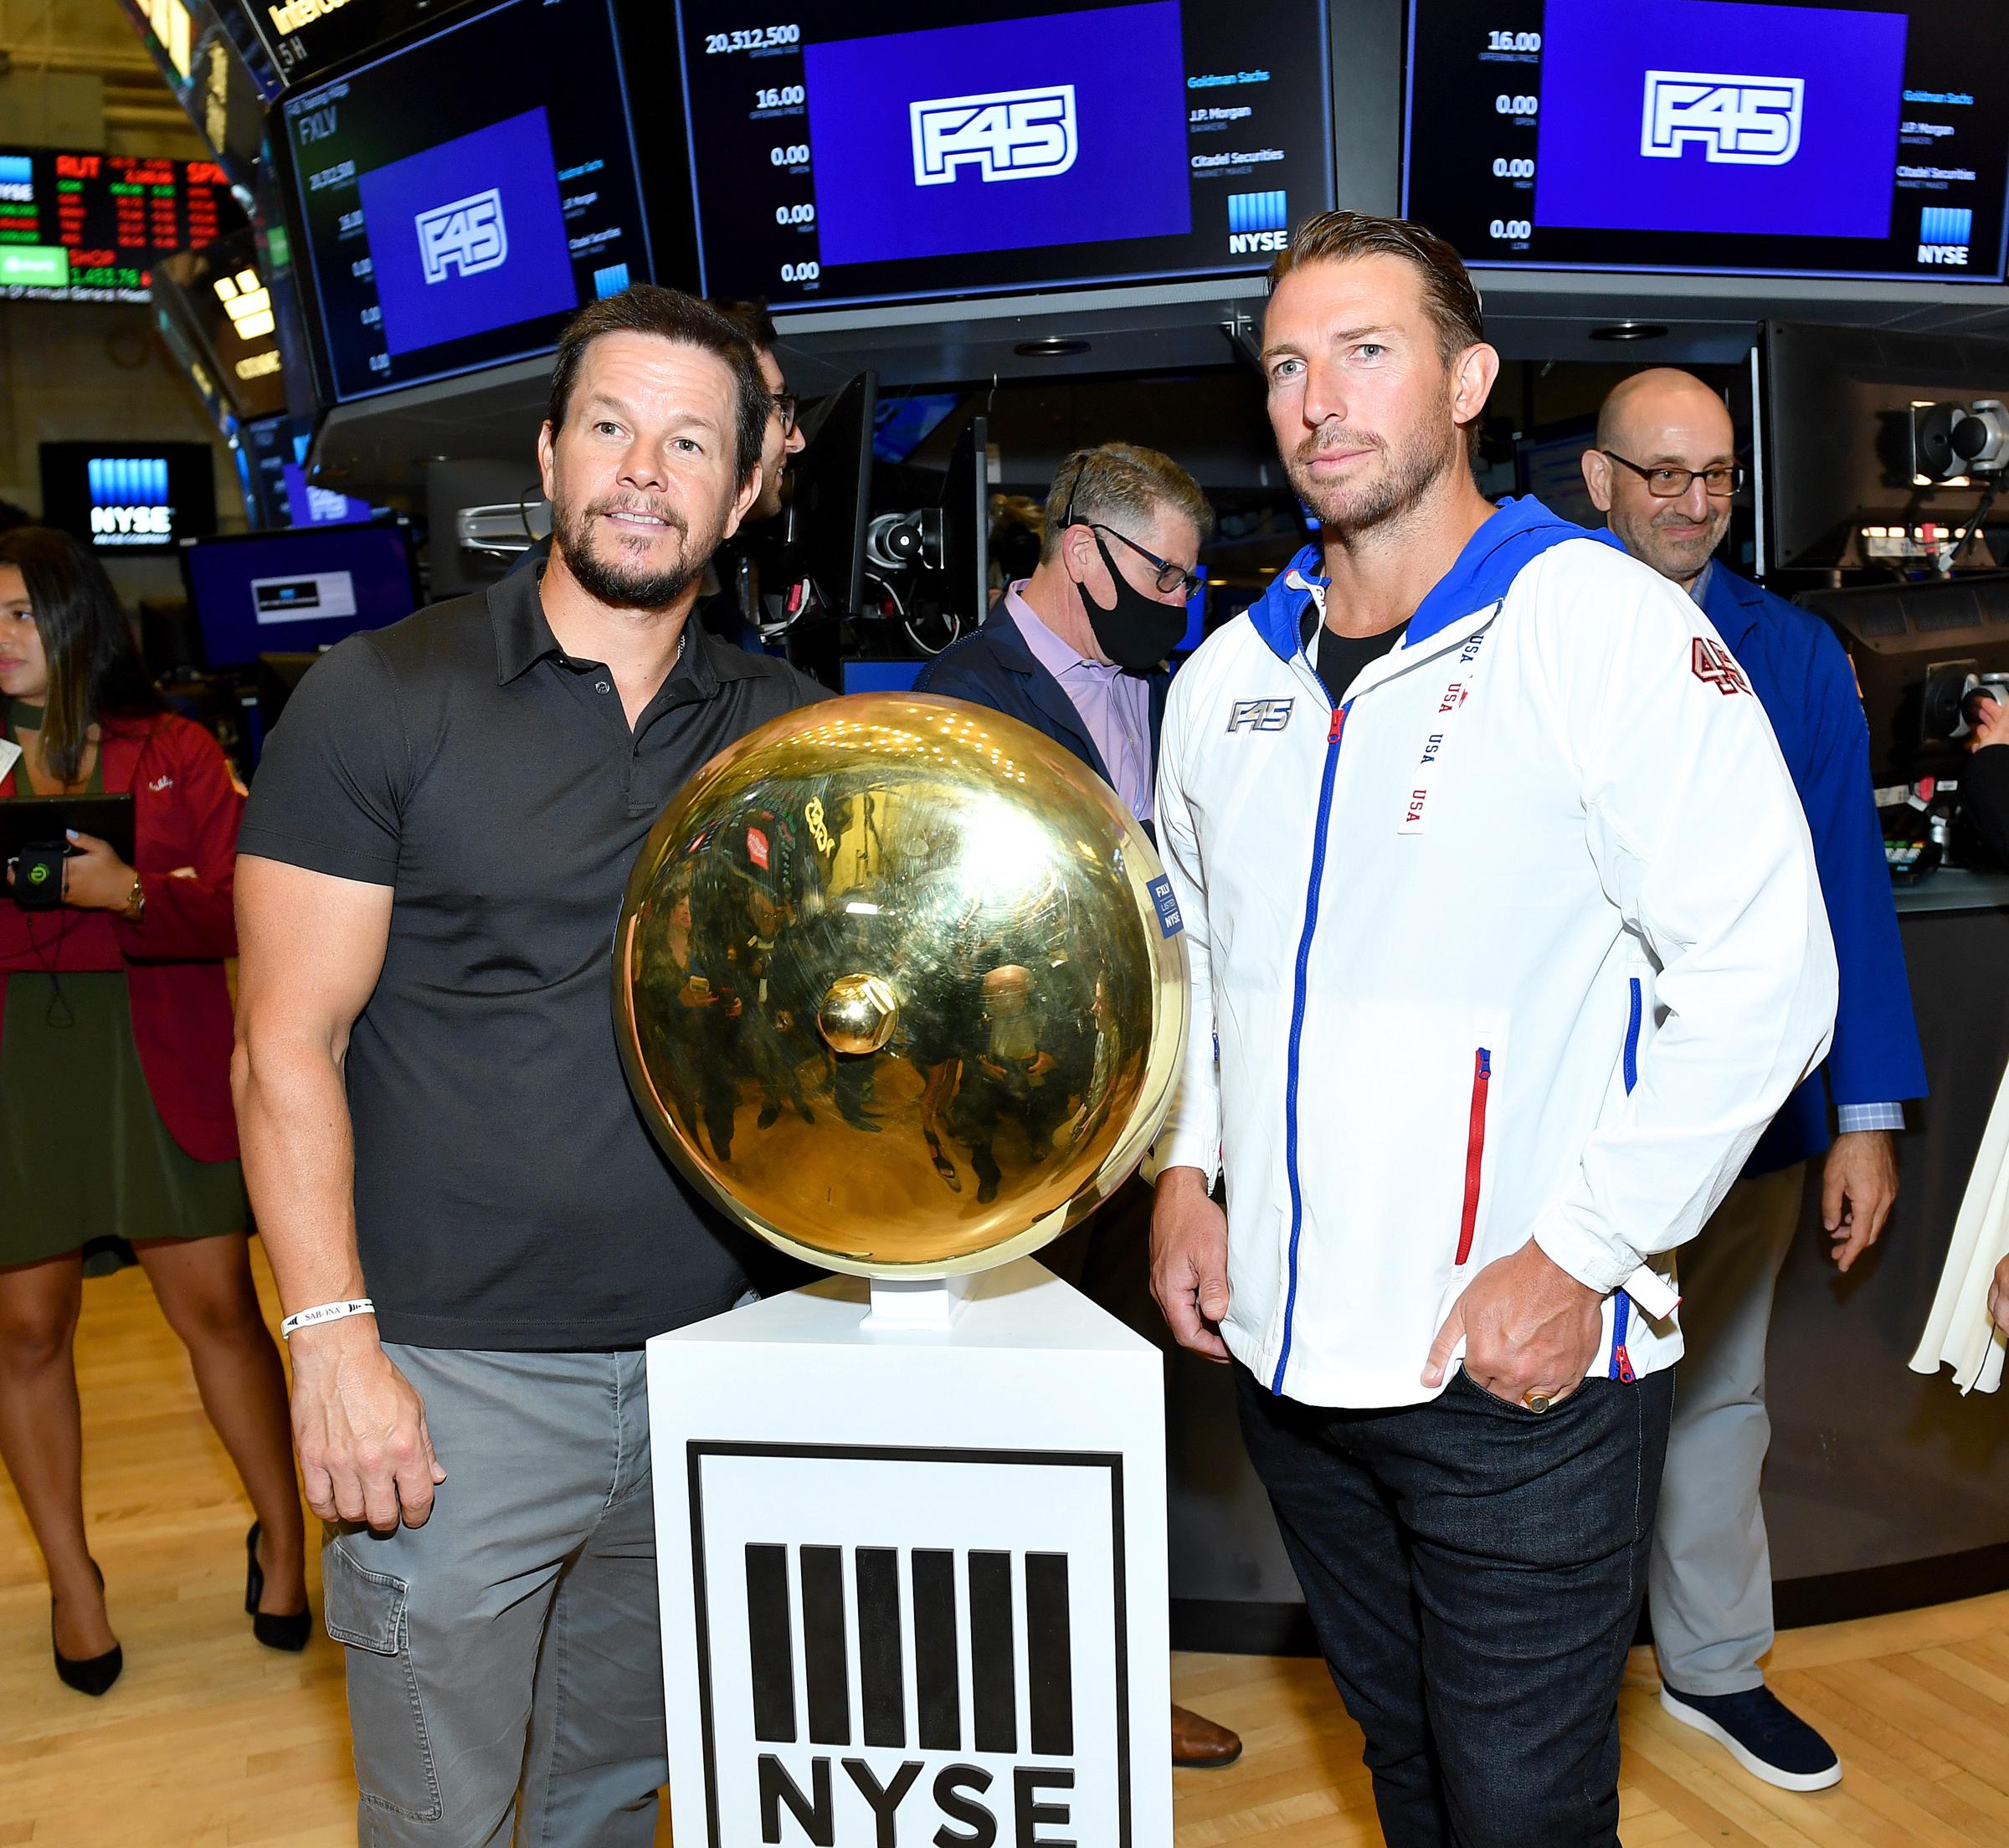 Mark Wahlberg and F45 Founder and CEO Adam Gilchrist pose on the trading floor as they rings the opening bell at the New York Stock Exchange on July 15, 2021. | Source: Getty Images